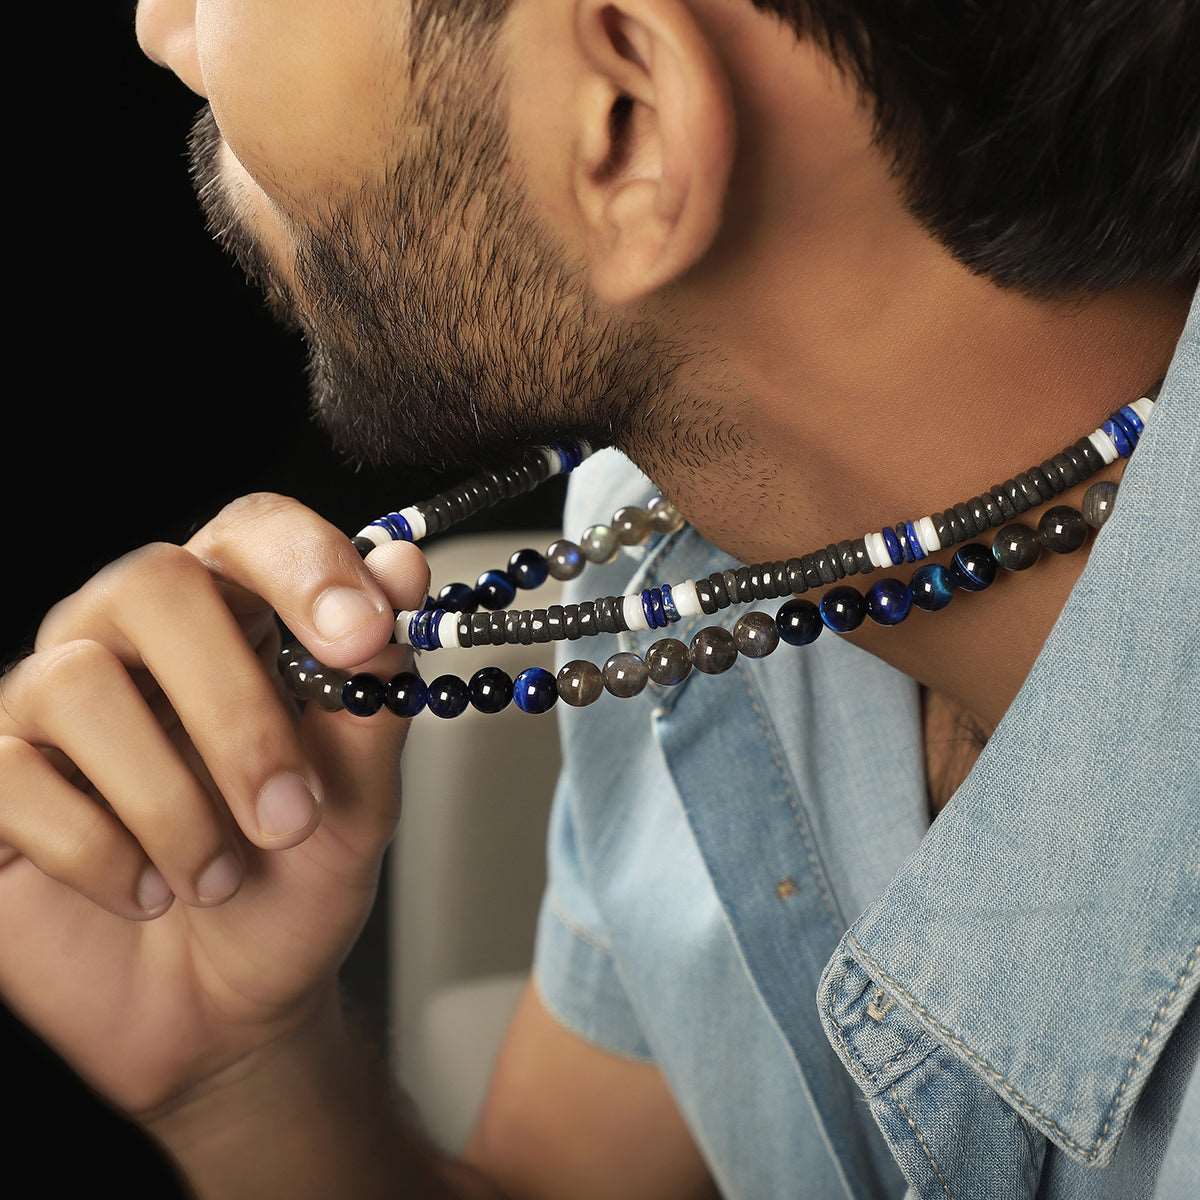 Starrenterprisess Rice blue color Necklace Chains for Men Boys Boyfriend  Girlfriend Gents Stainless Steel Chain Price in India - Buy  Starrenterprisess Rice blue color Necklace Chains for Men Boys Boyfriend  Girlfriend Gents